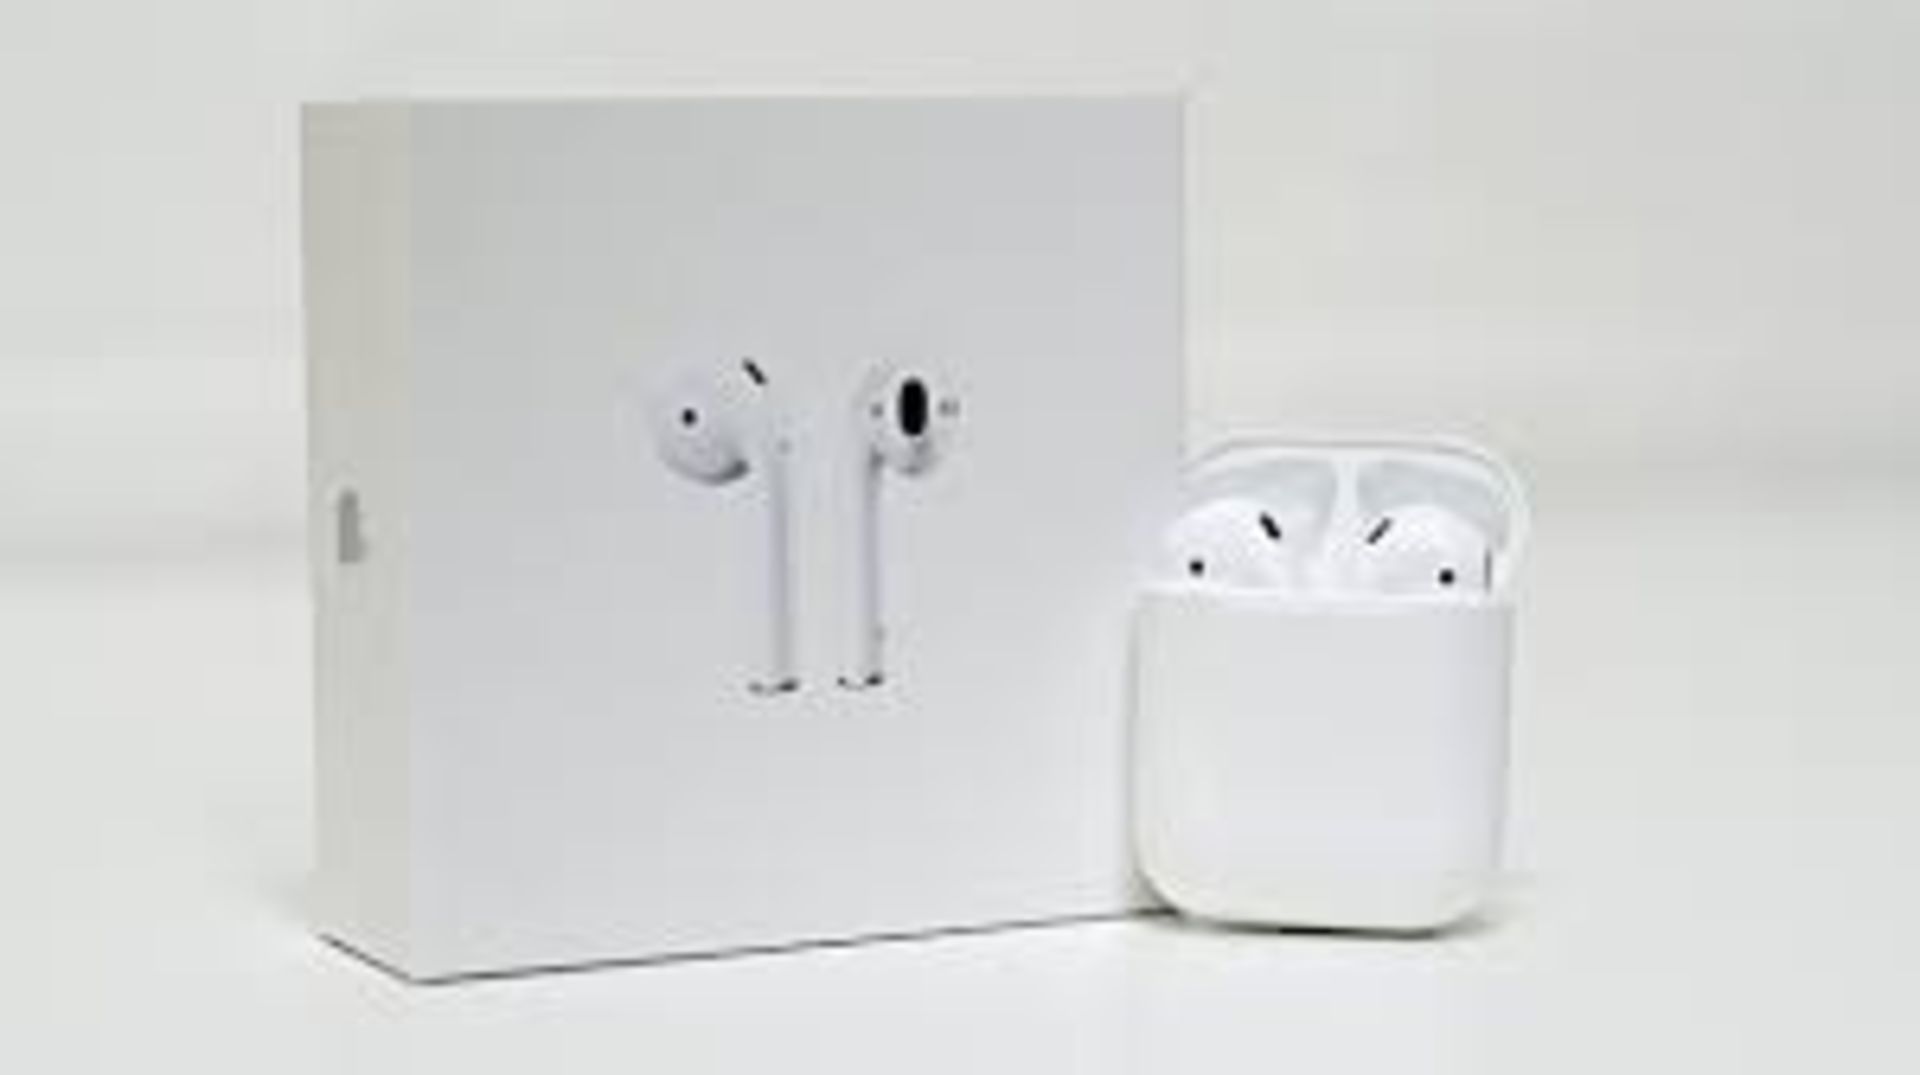 Apple airpods. PCK